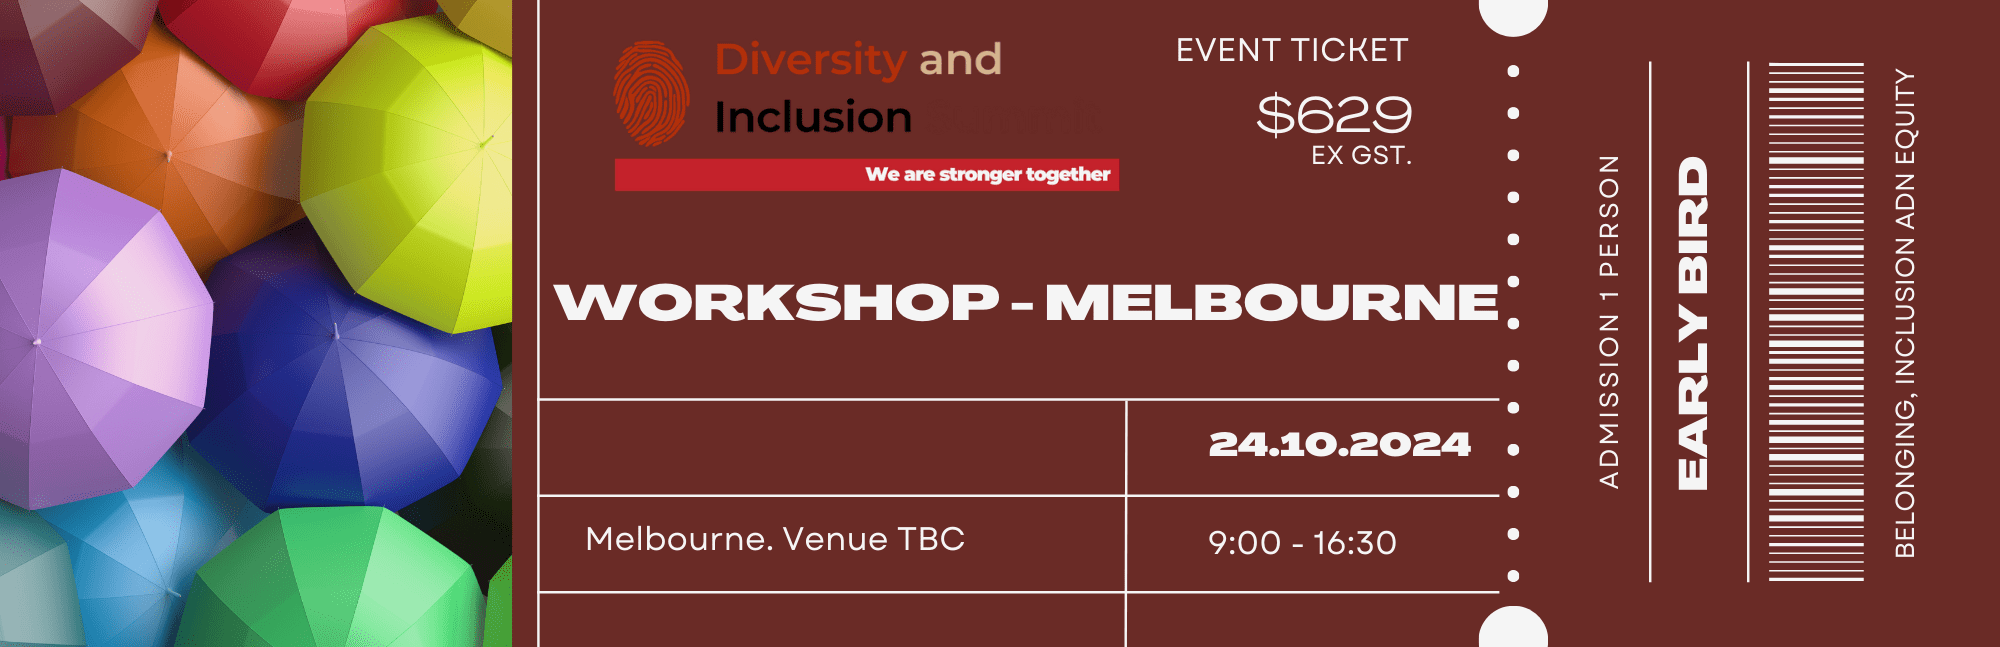 Melbourne 24 October 2024 (Single Ticket) Diversity and